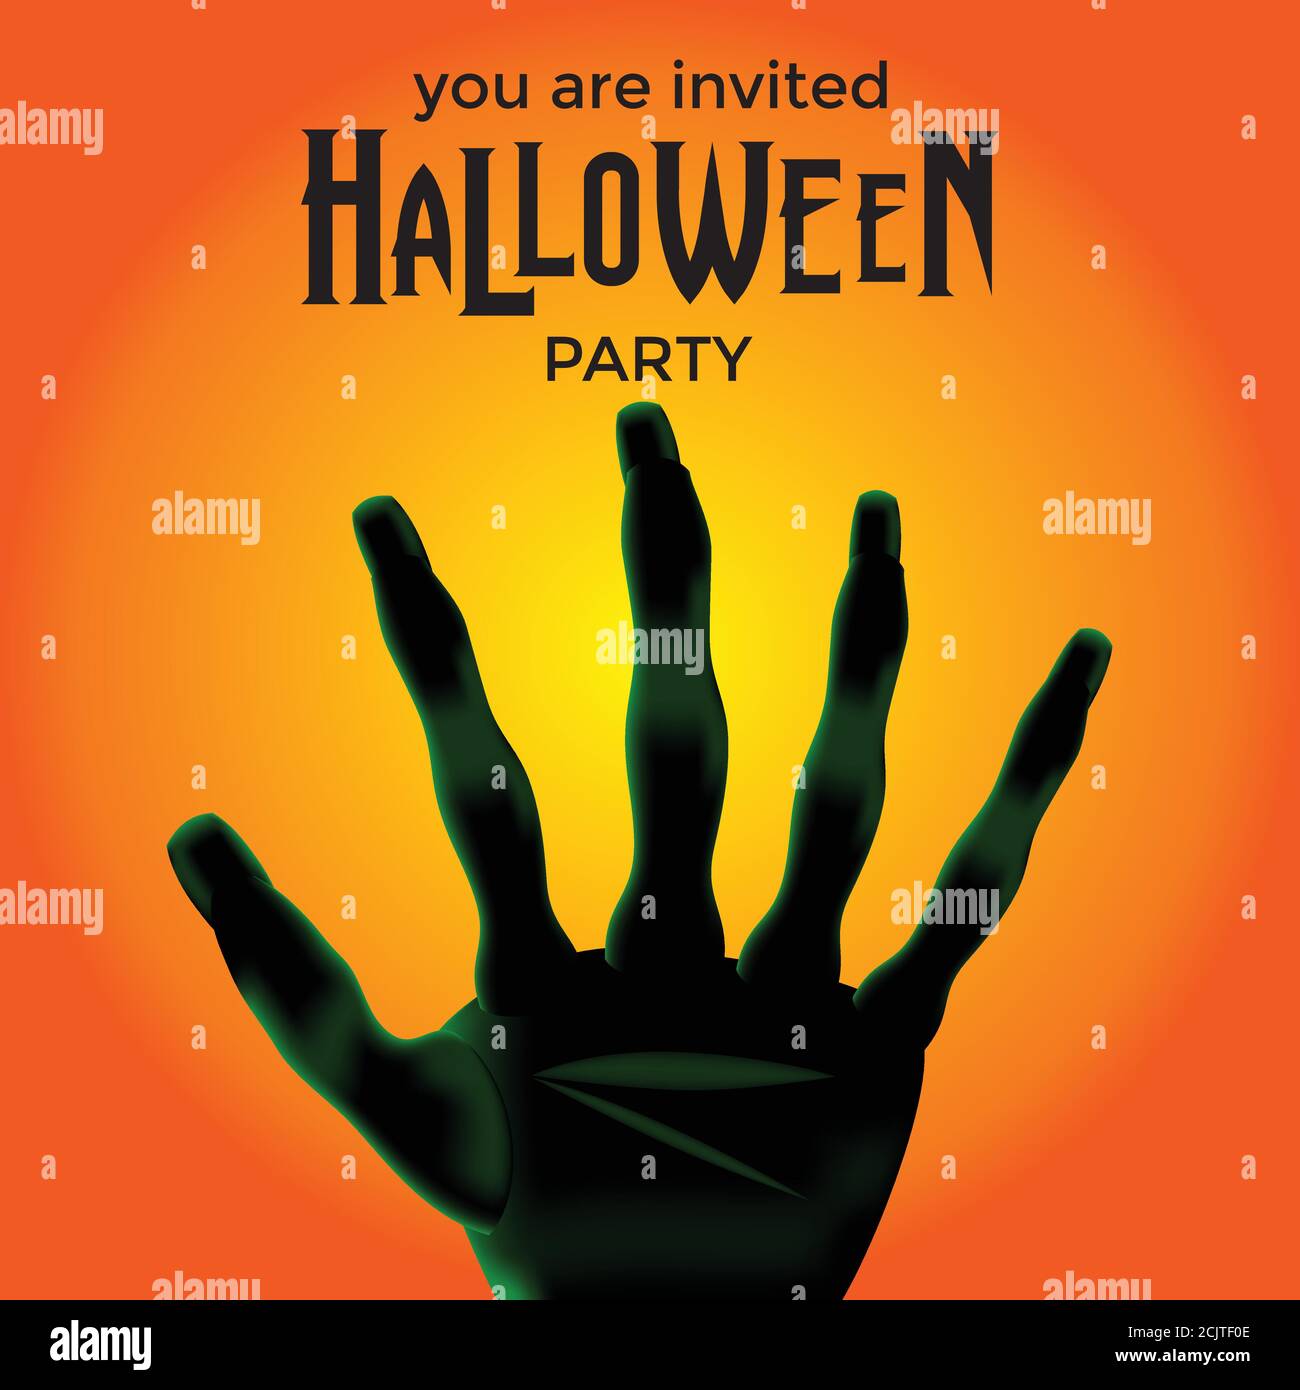 invitation halloween party banner poster with illustration of scary corpse hand Stock Vector